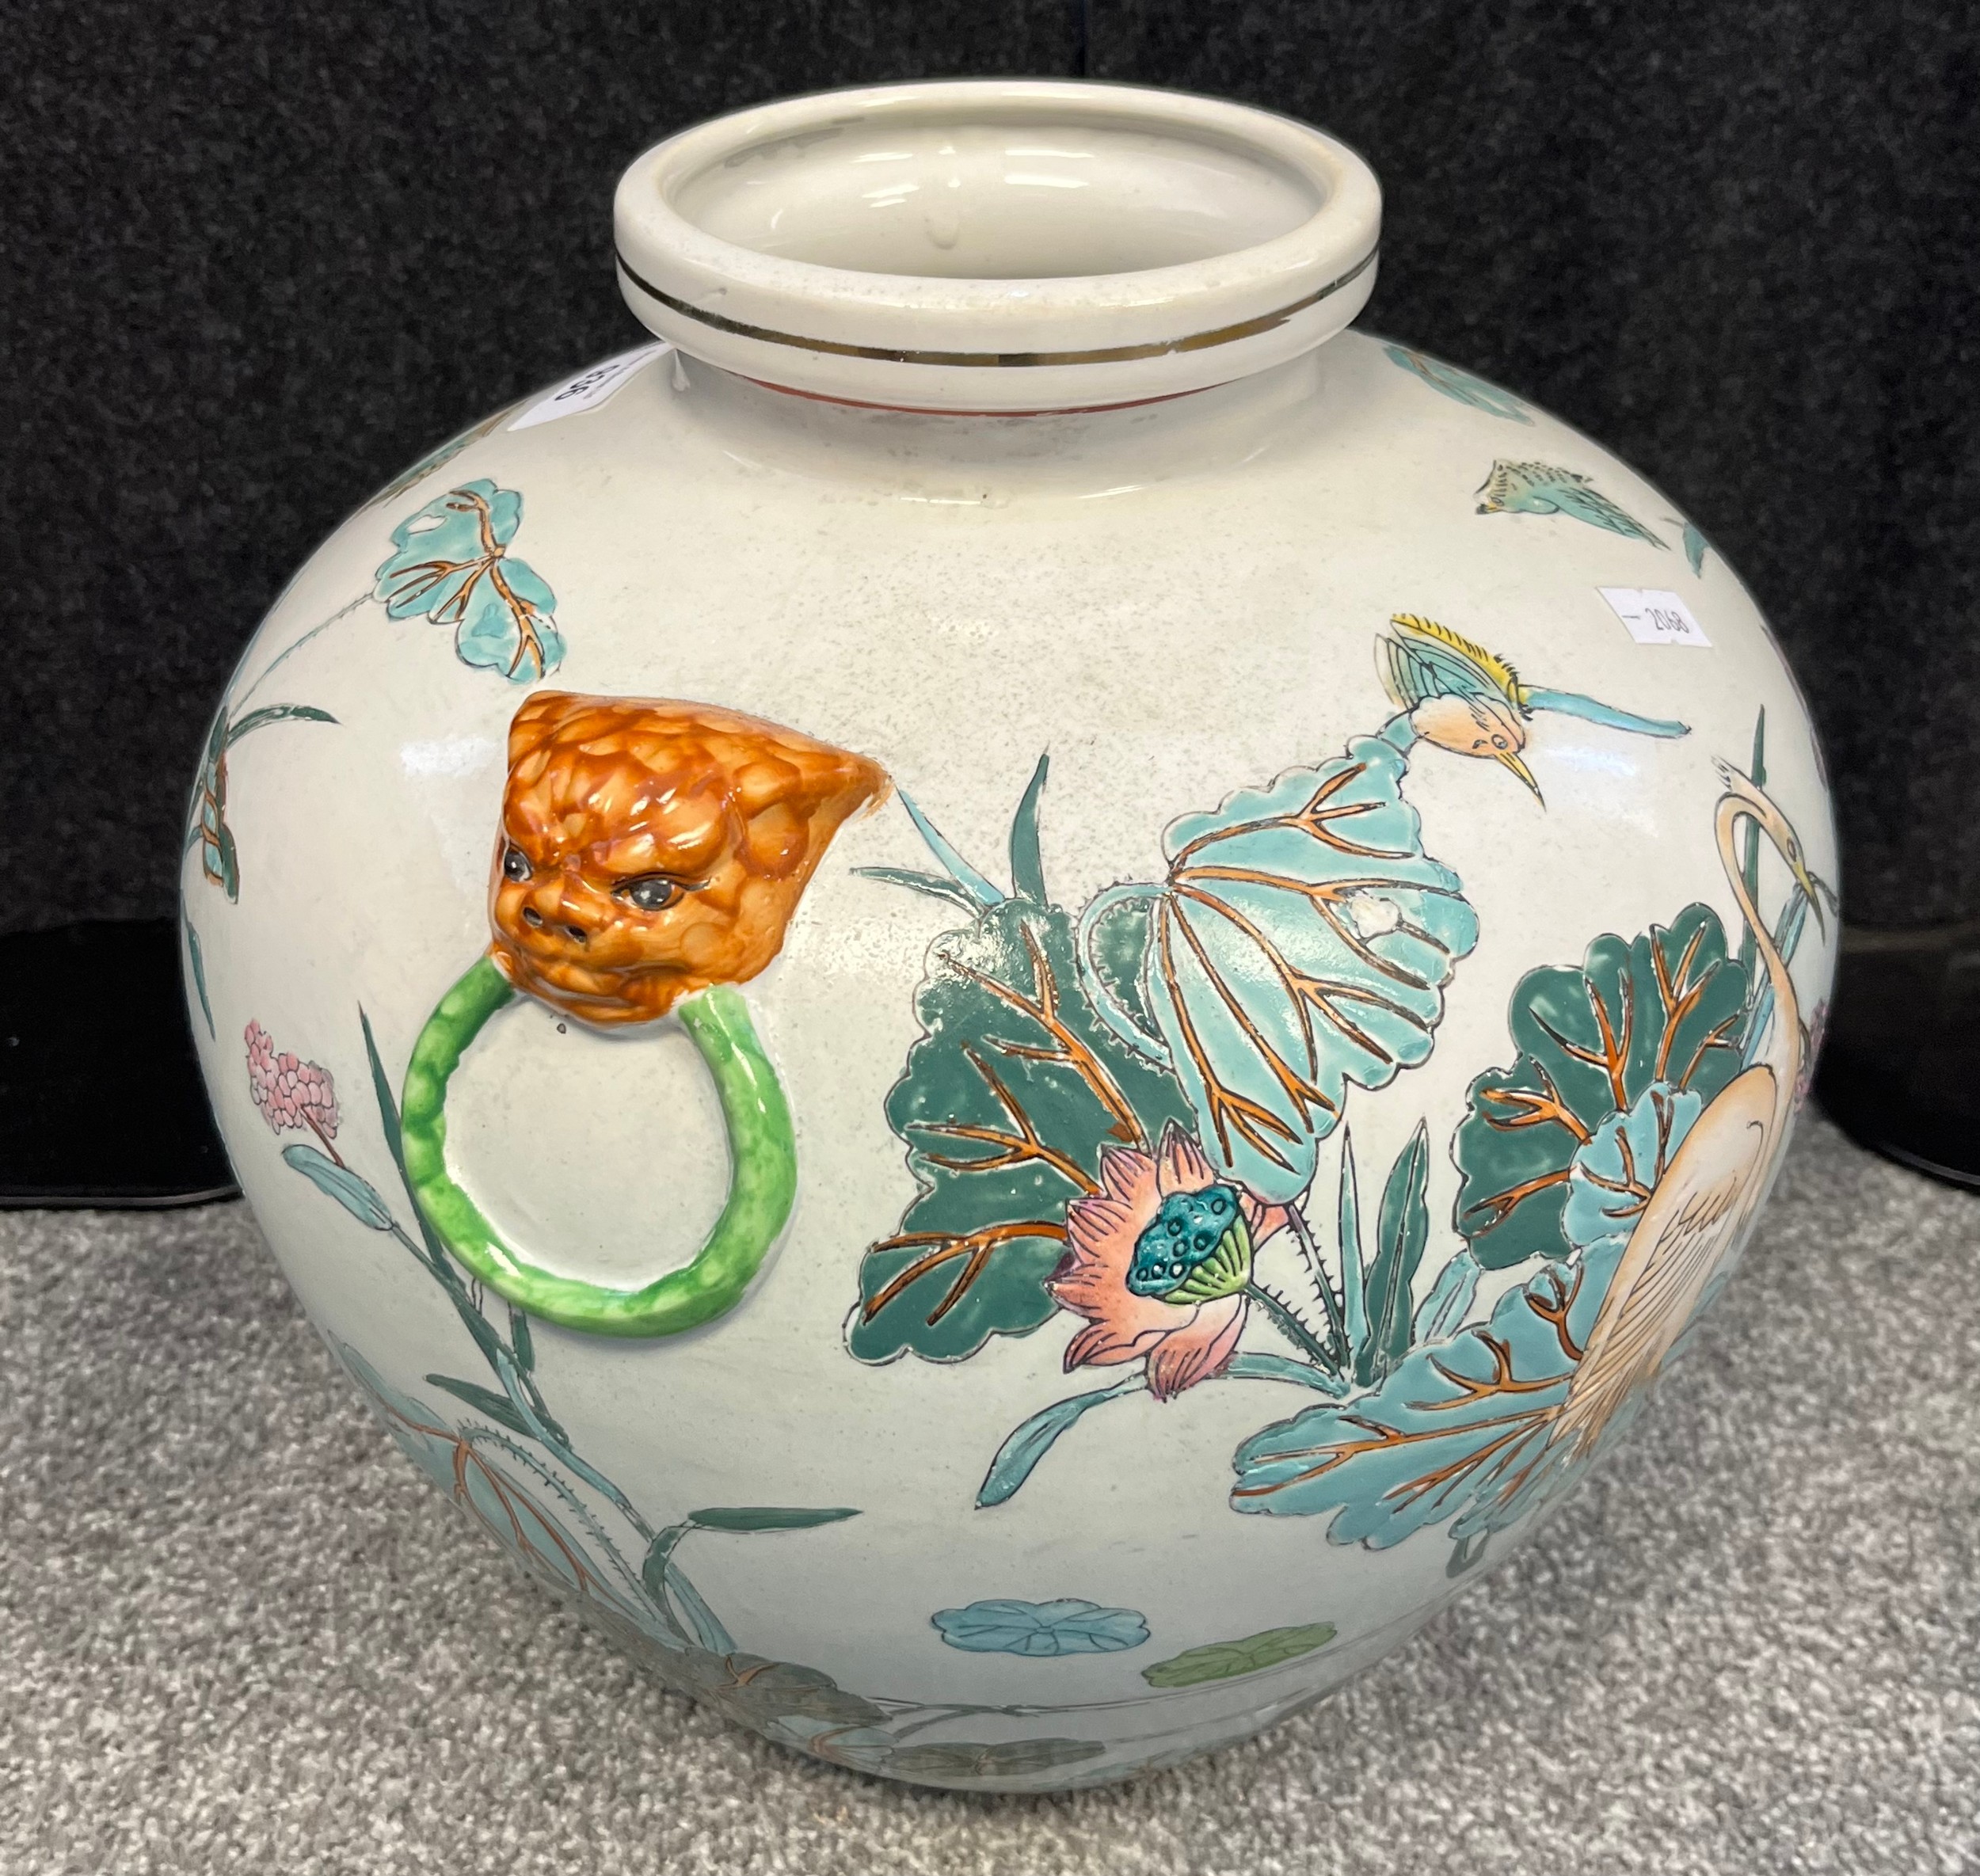 20th century Chinese bulbous vase depicting floral and bird design. [28cm high] - Image 2 of 4